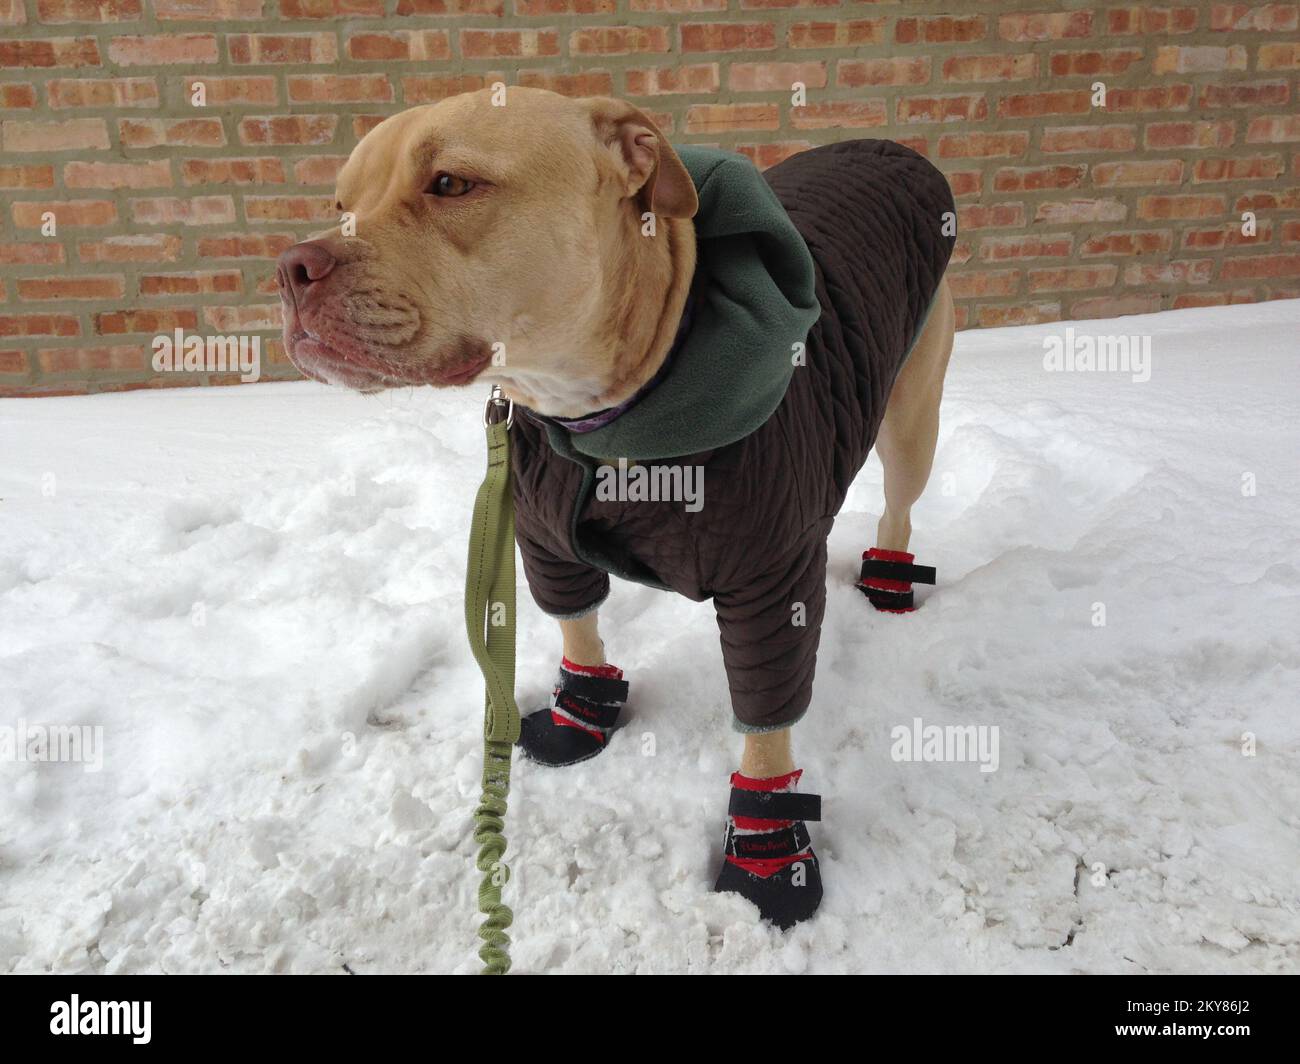 Chicago, Ill., January 26, 2013   Before going on a walk, Jade's owner dressed her for the winter weather. Learn more about preparing your pets in the winter at www.Ready.gov/caring-animals.. Photographs Relating to Disasters and Emergency Management Programs, Activities, and Officials Stock Photo